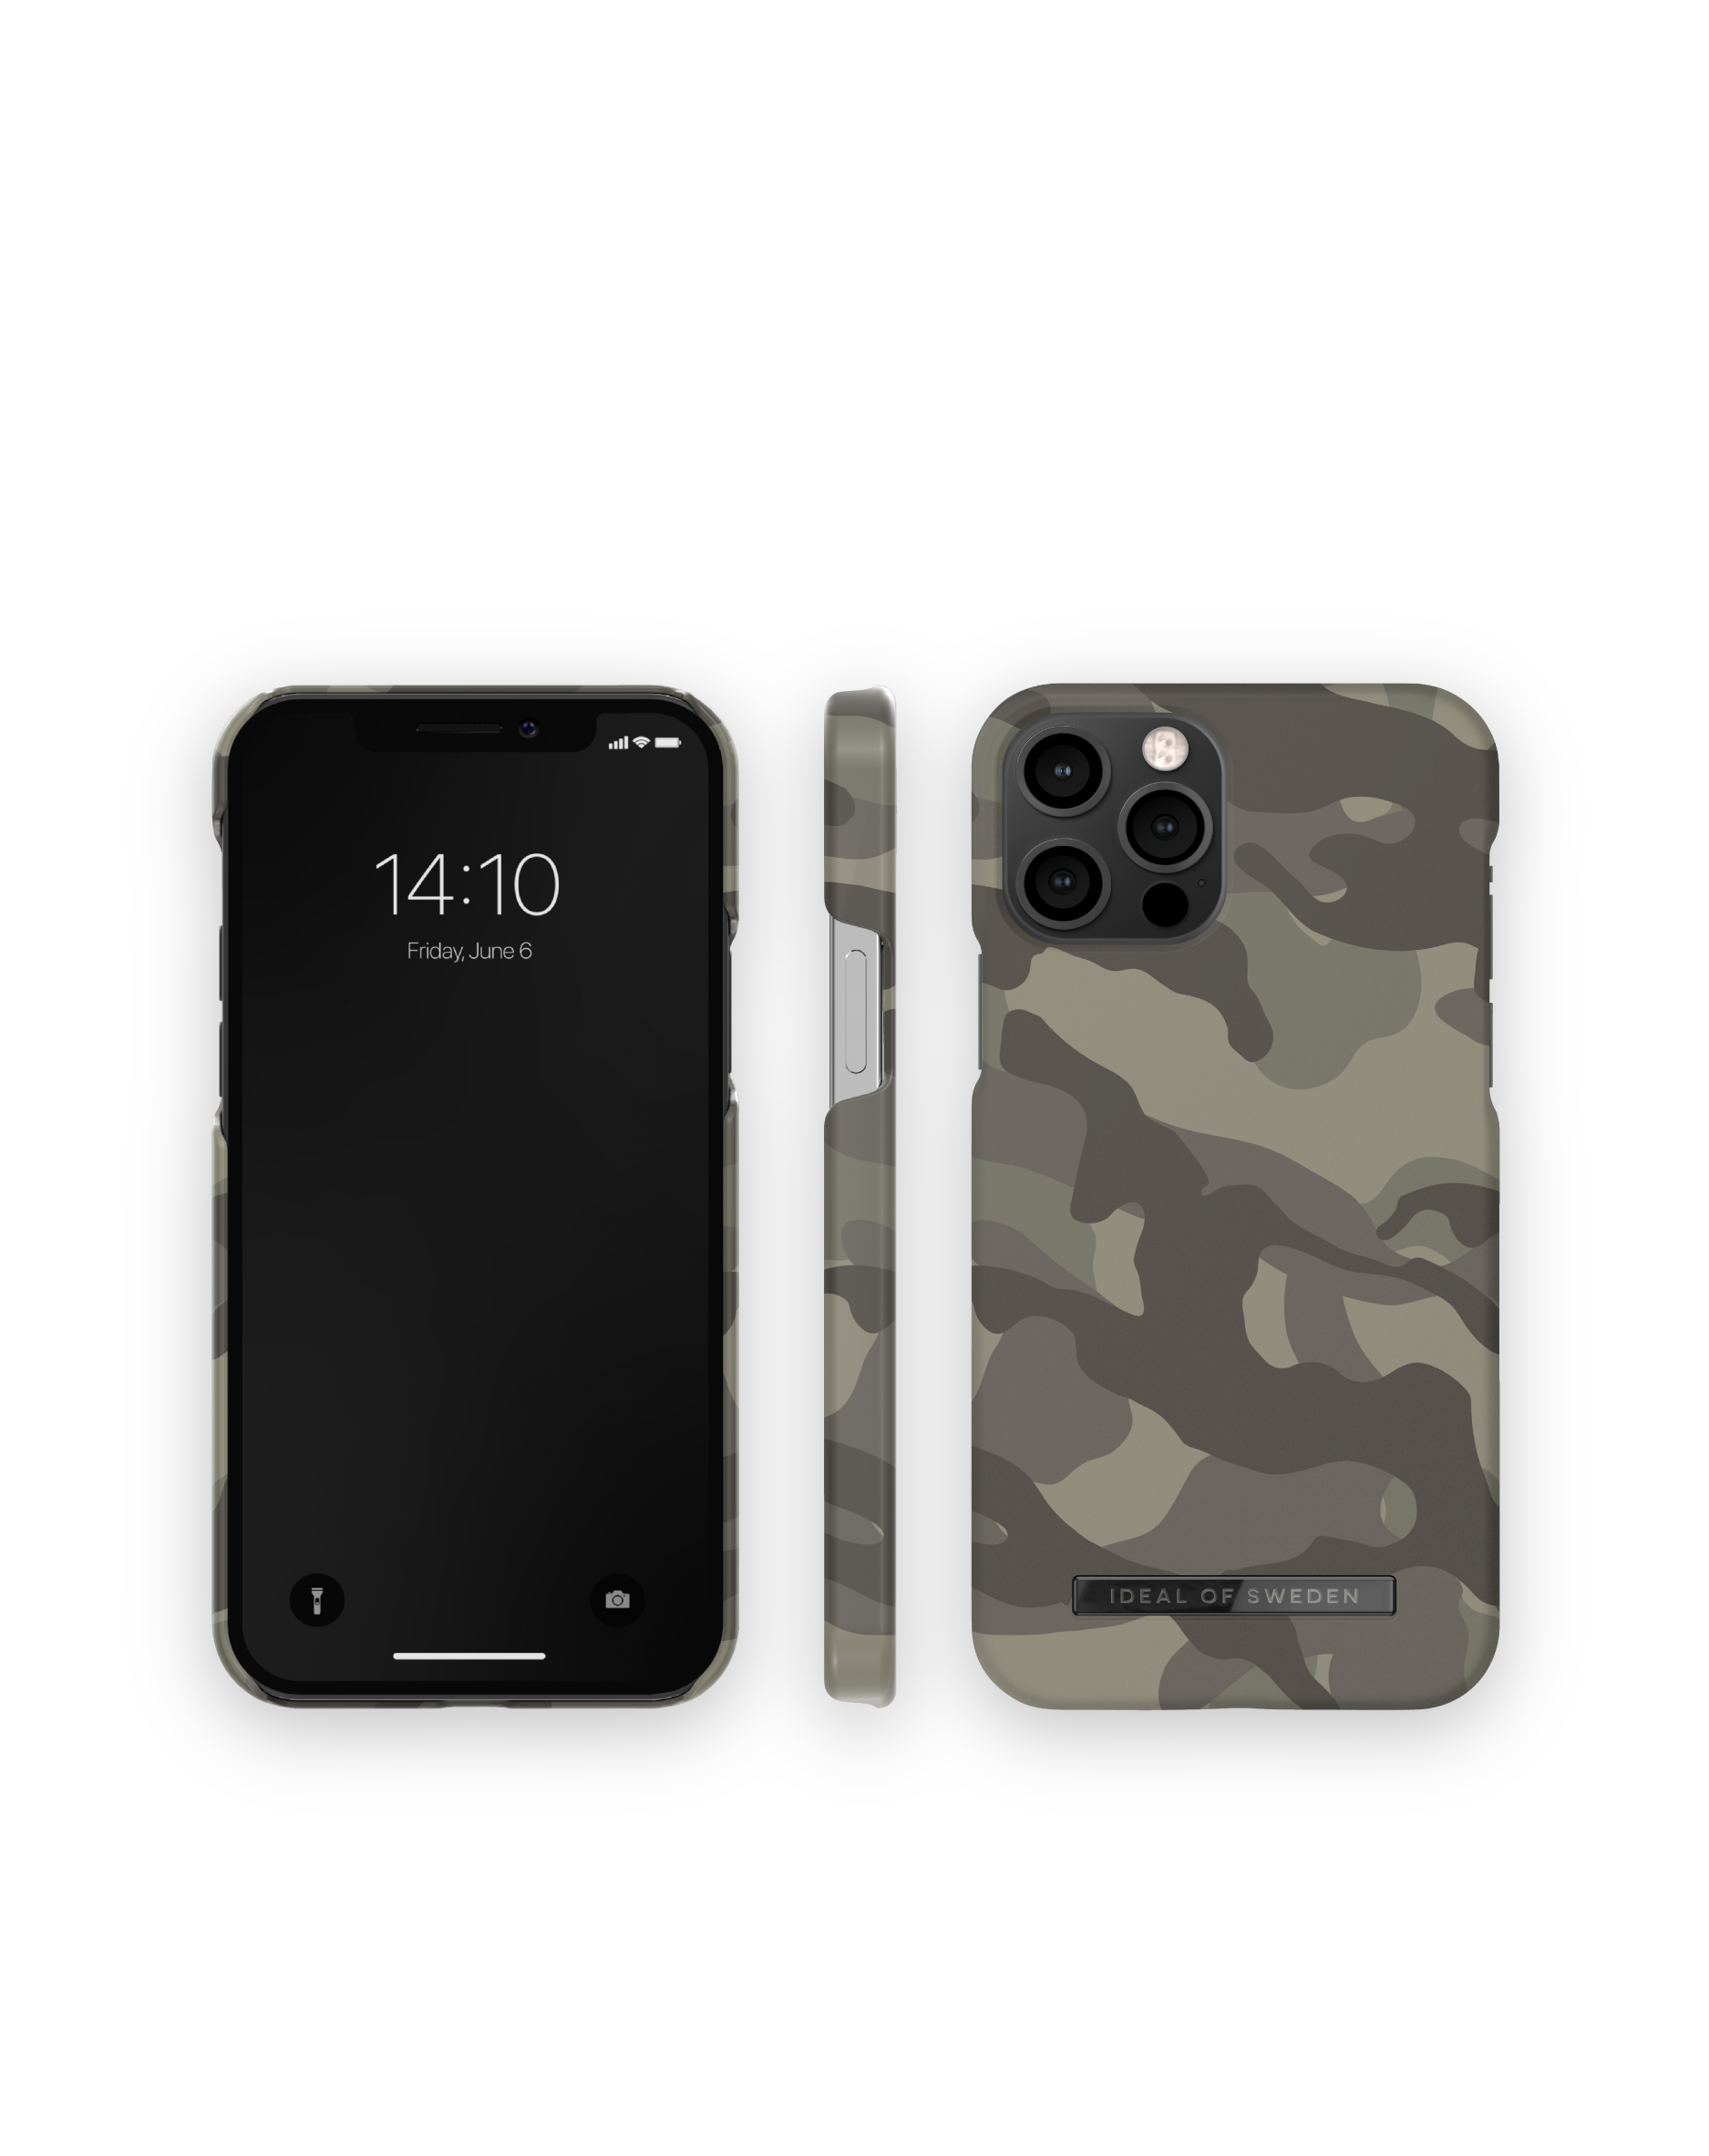 Matte IDFCAW21-I2061-359, OF Camo Pro, Apple, iPhone IDEAL SWEDEN Backcover, 12/12